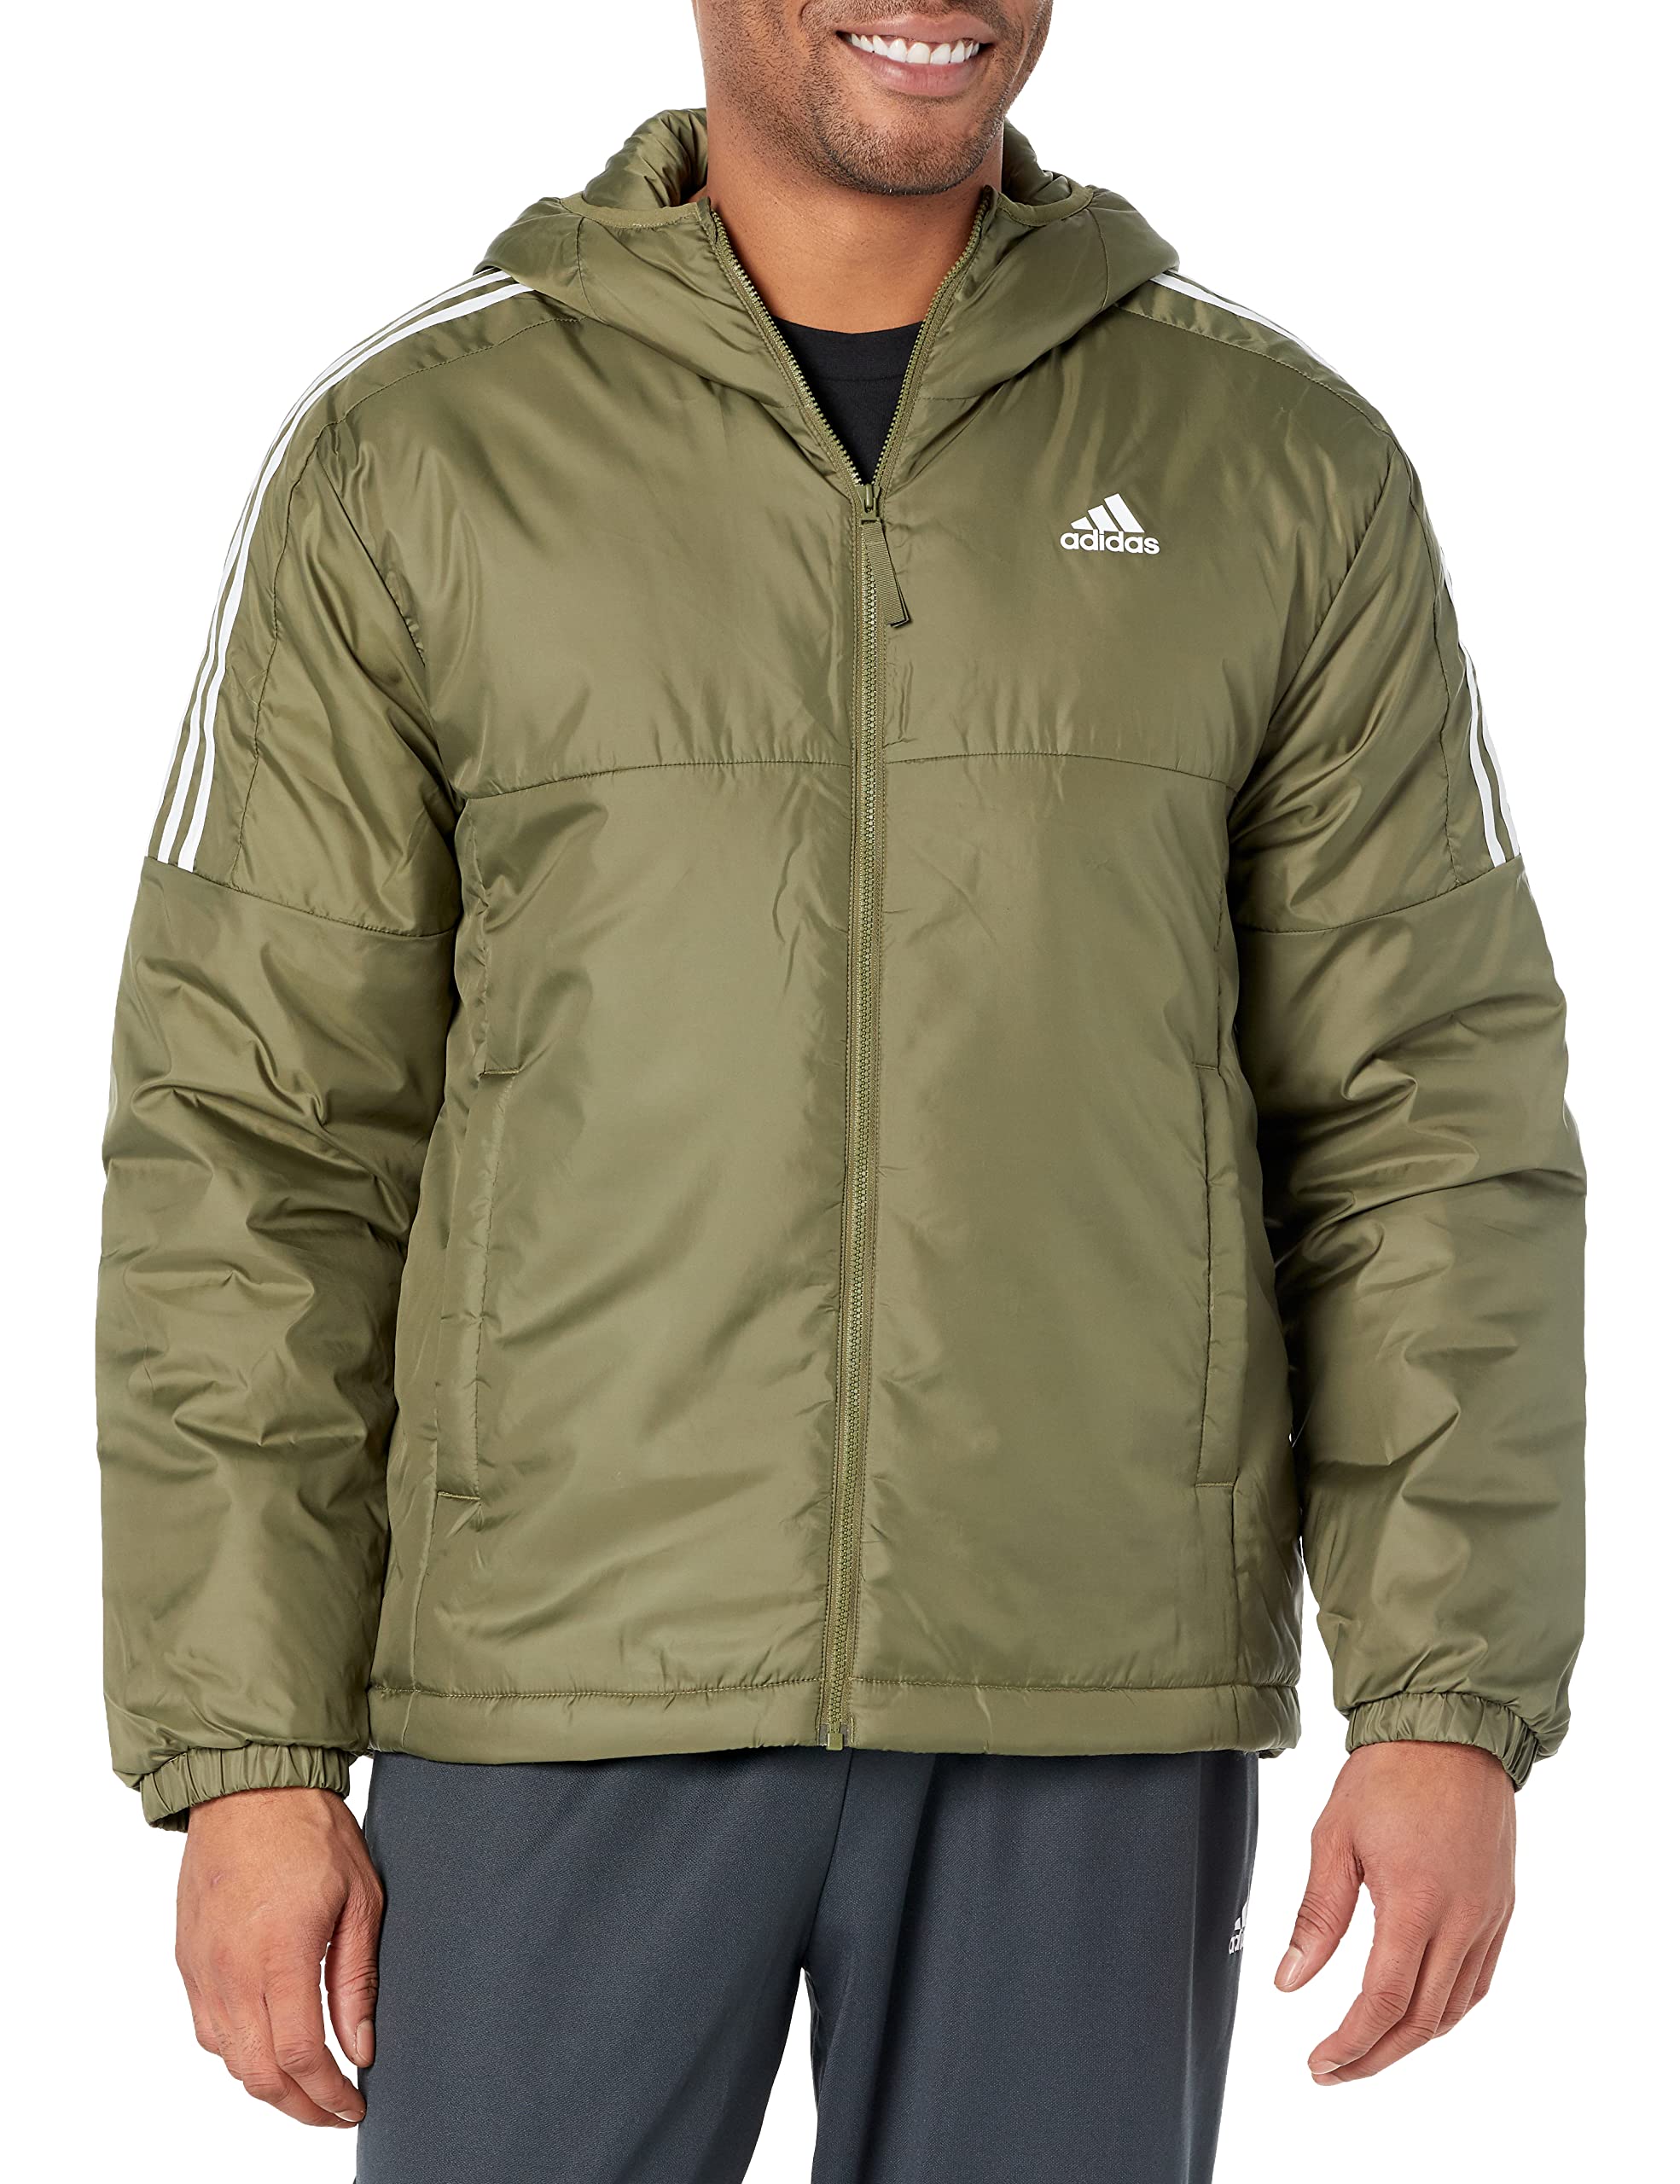 adidas Men's Essentials Insulated Hooded Jacket (Focus Olive, Size XL) $30.09 + Free Shipping